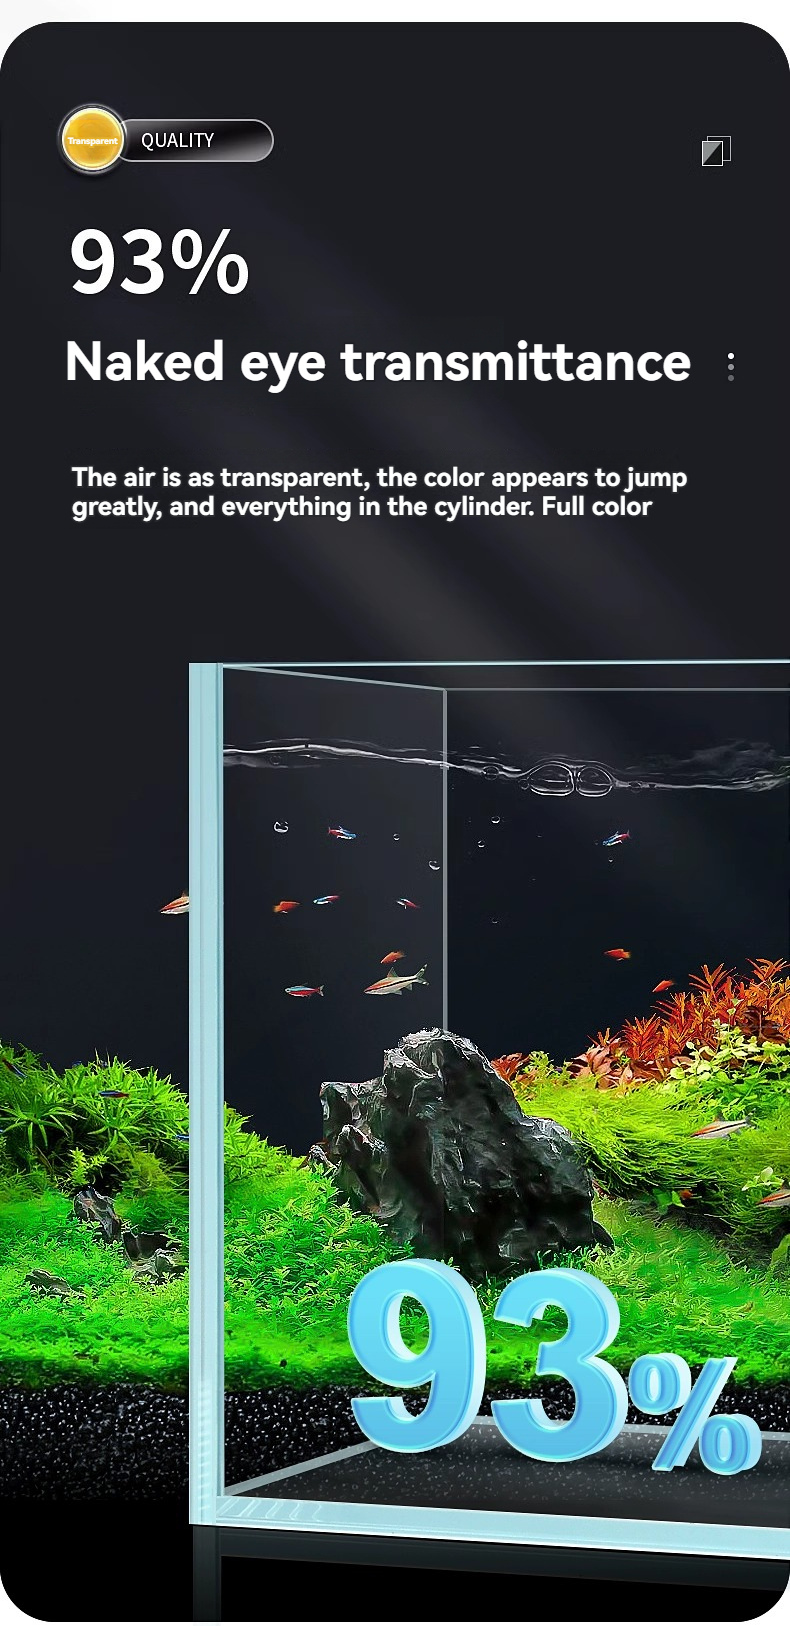 Ultra White Glass Fish Tank - Small Auditorium Ecological Tank for Fish, Hydroponic Plants, and Turtles